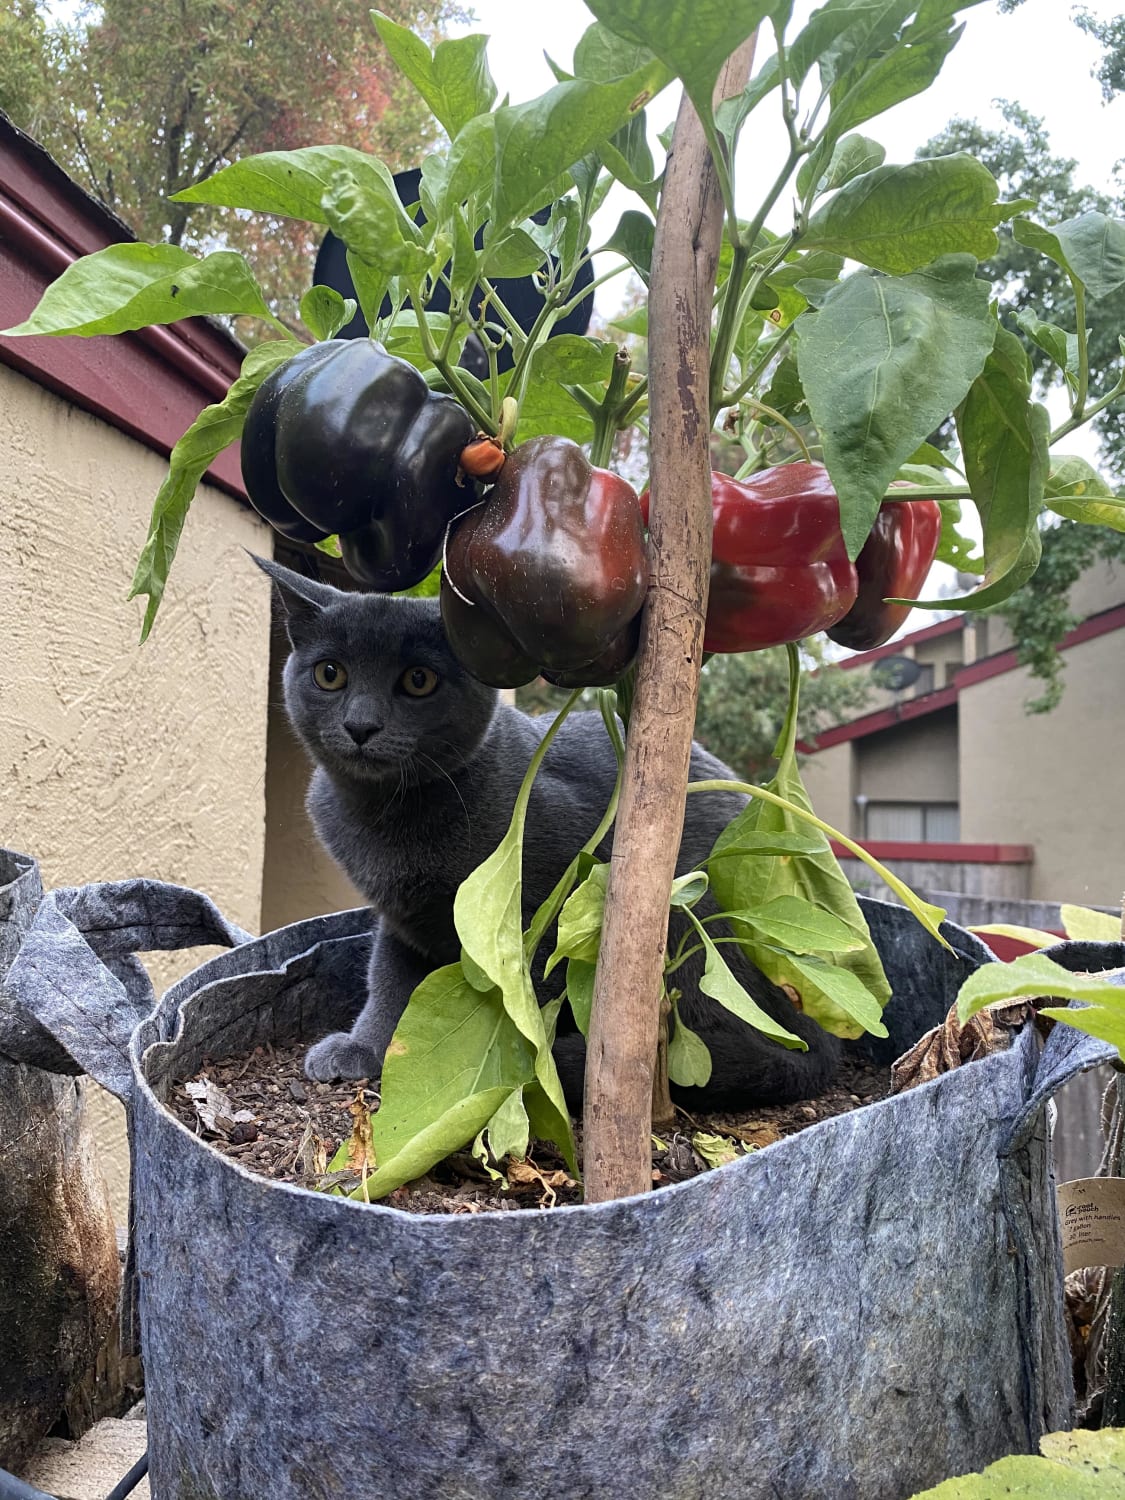 No cat here. Just us bell peppers.